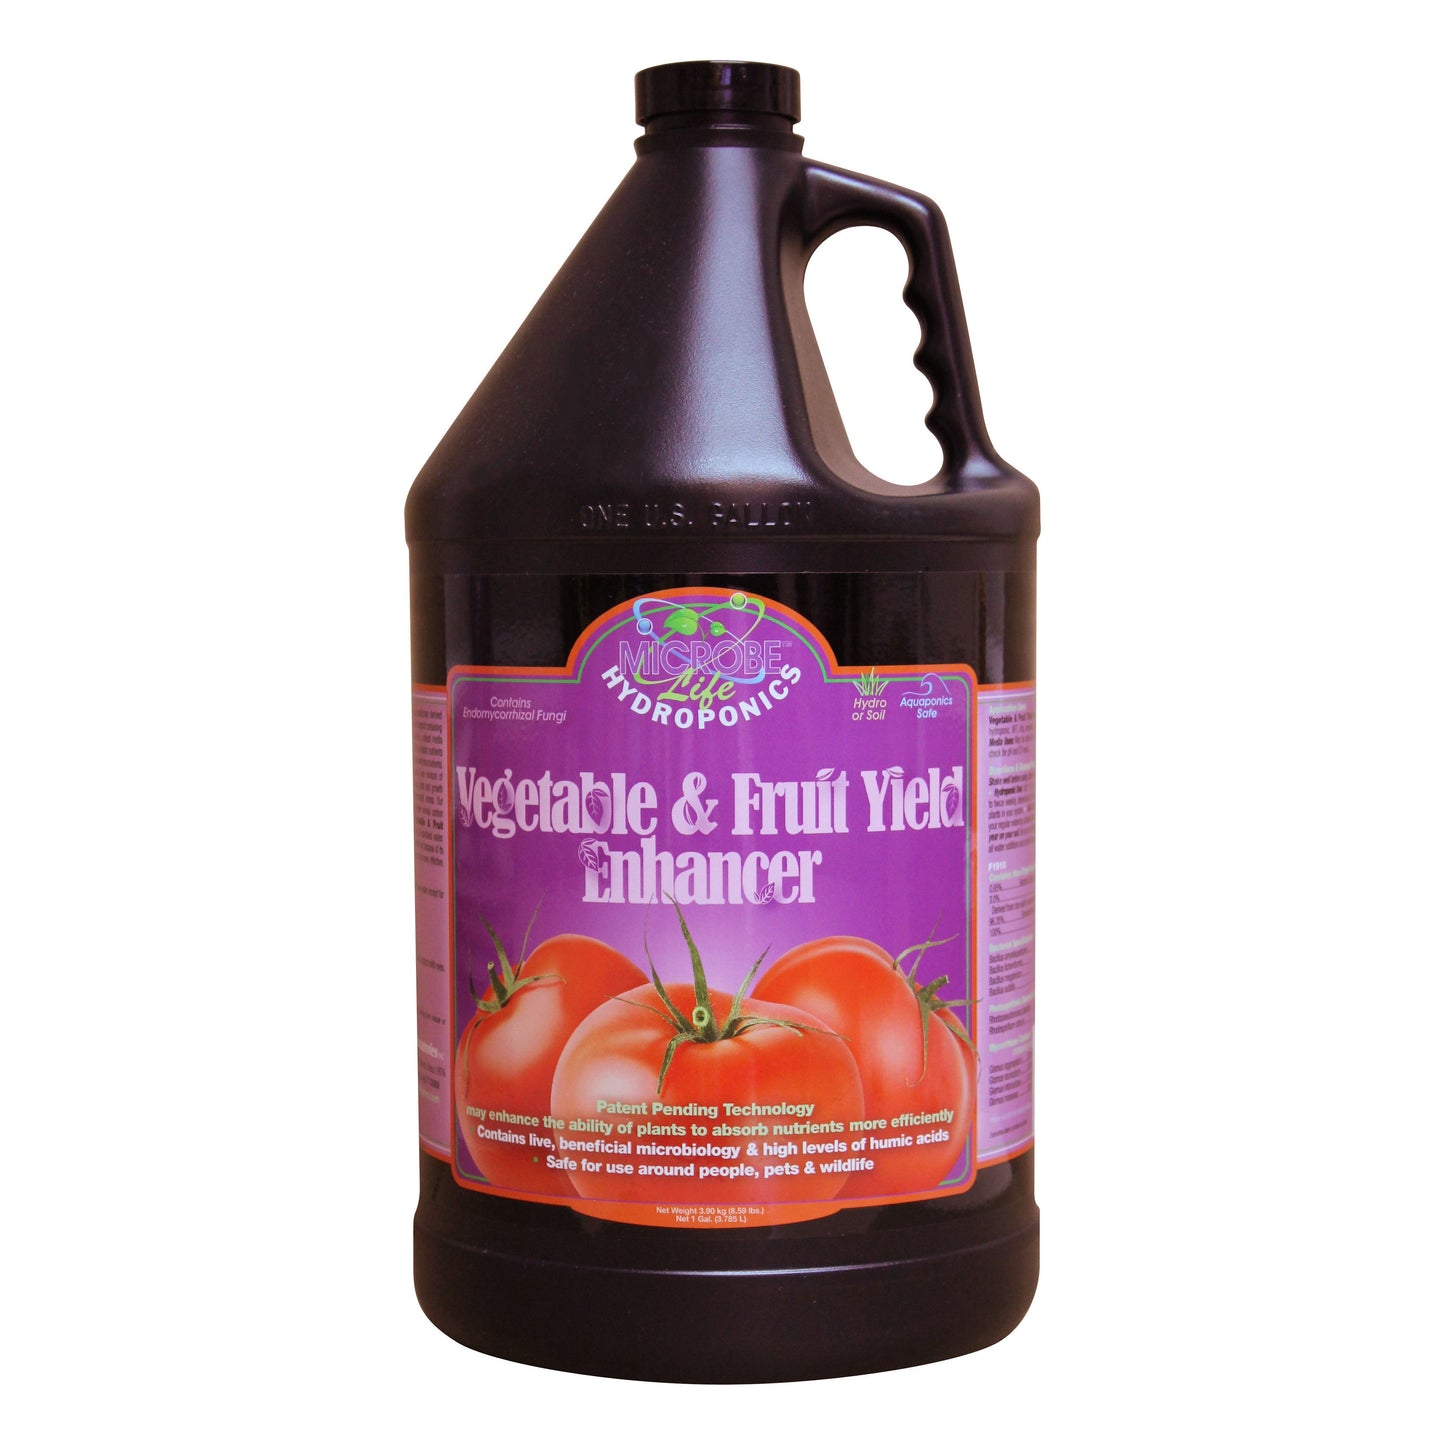 Vegetable & Fruit Yield Enhancer by Microbe Life Hydroponics, 1 gallon